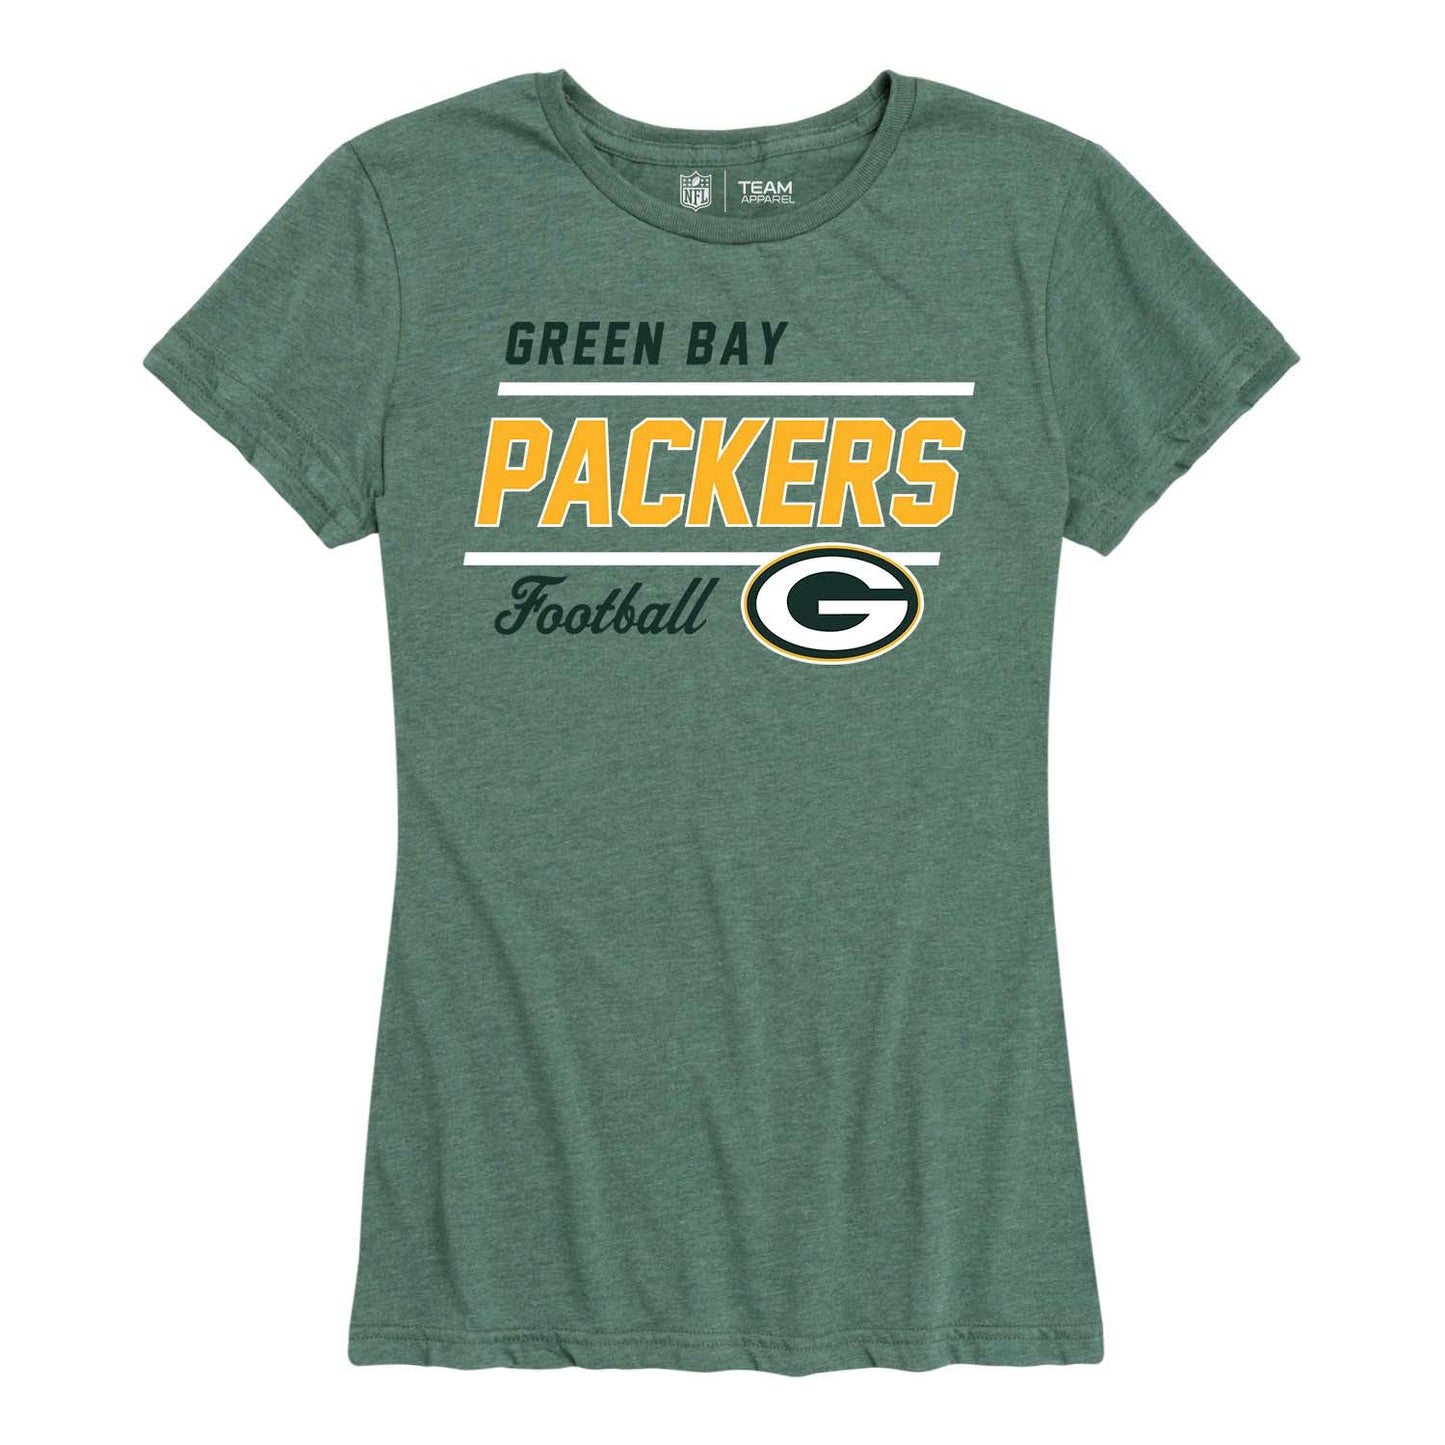 Green Bay Packers NFL Gameday Women's Relaxed Fit T-shirt - Green